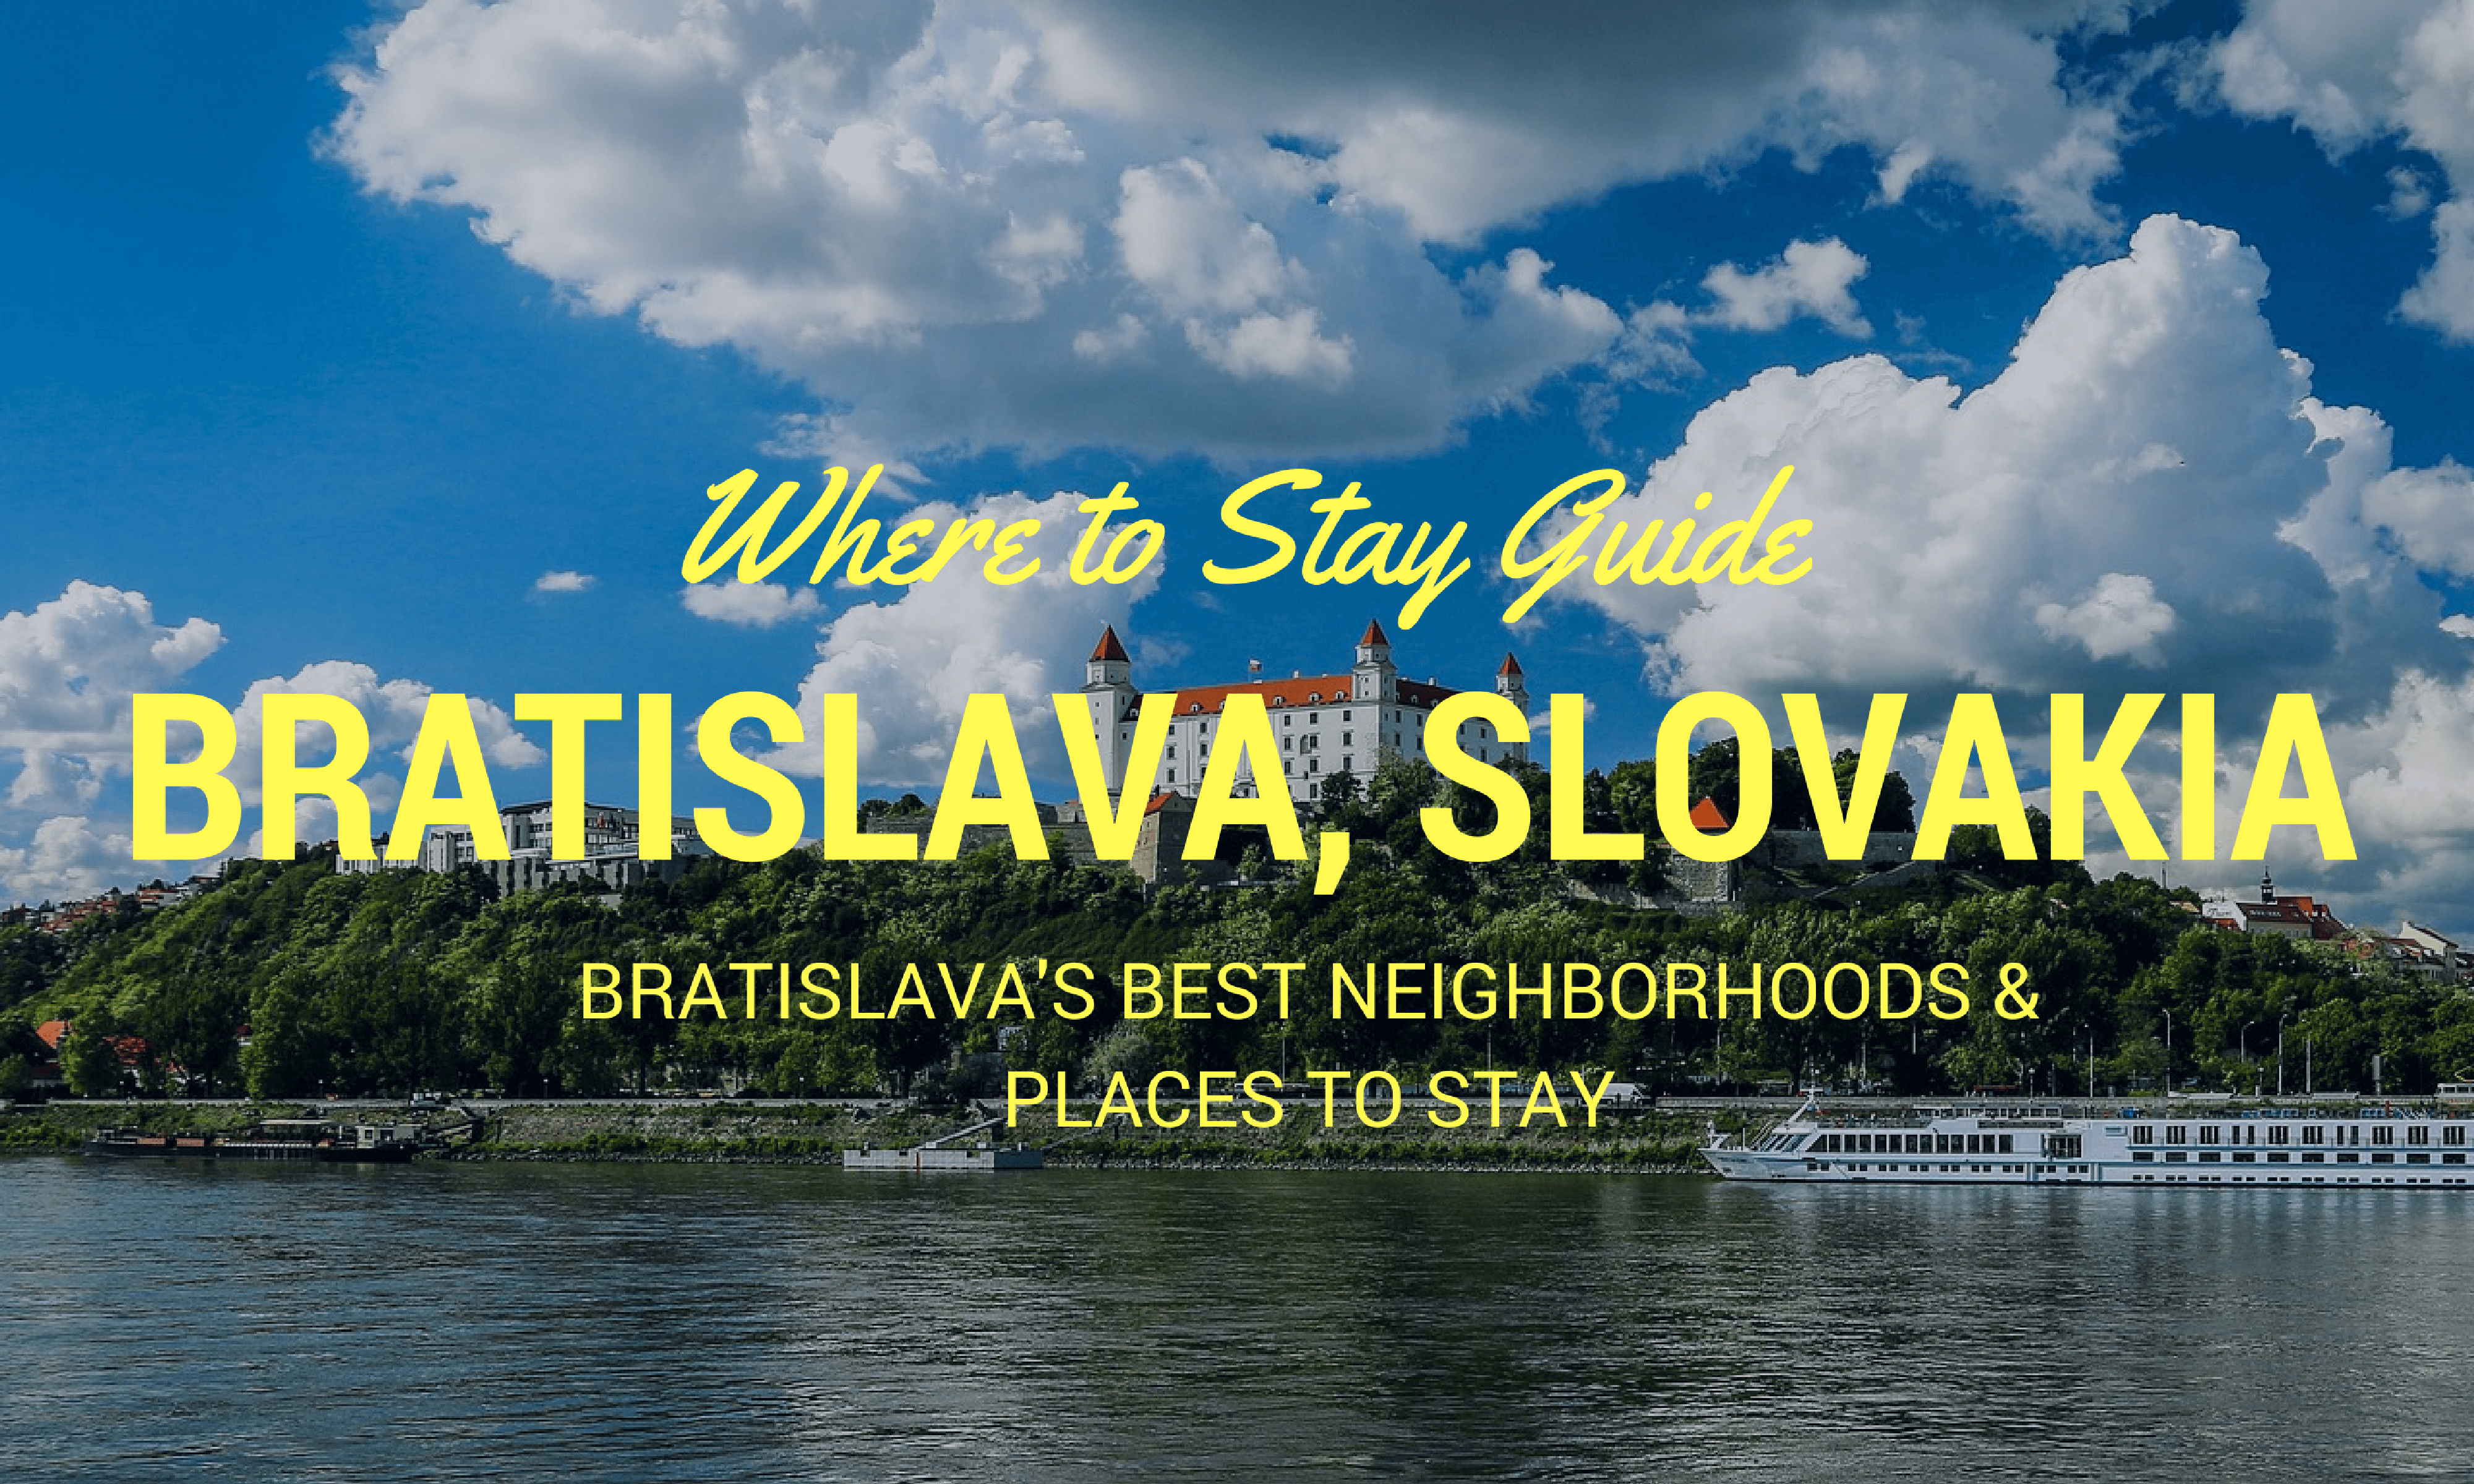 Where to Stay in Bratislava: Bratislava's Best Areas to Stay